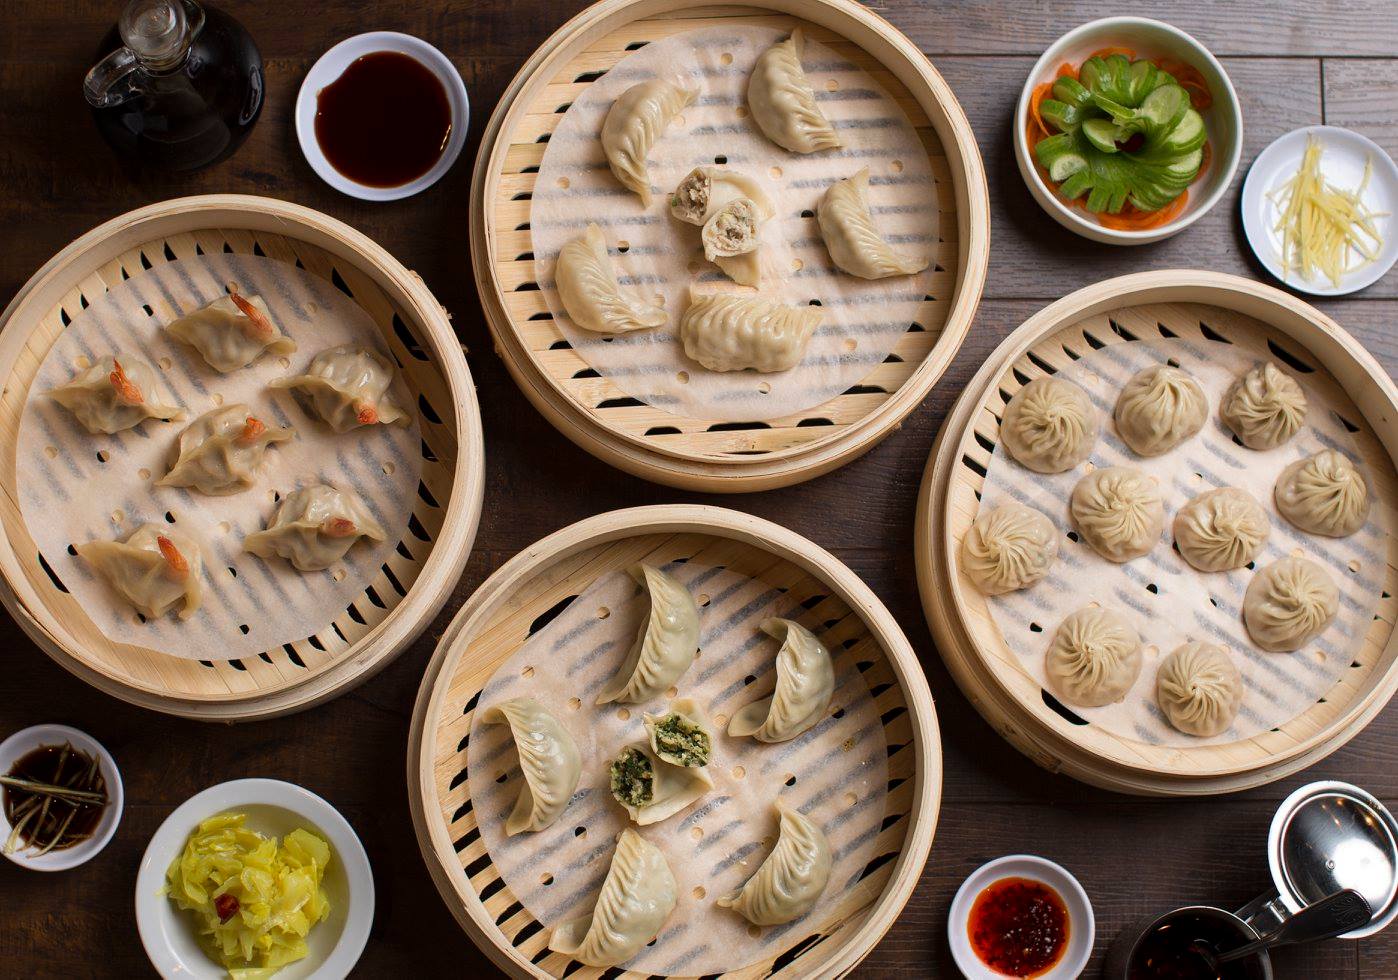 Pictured are dumplings from Dough Zone Dumpling House